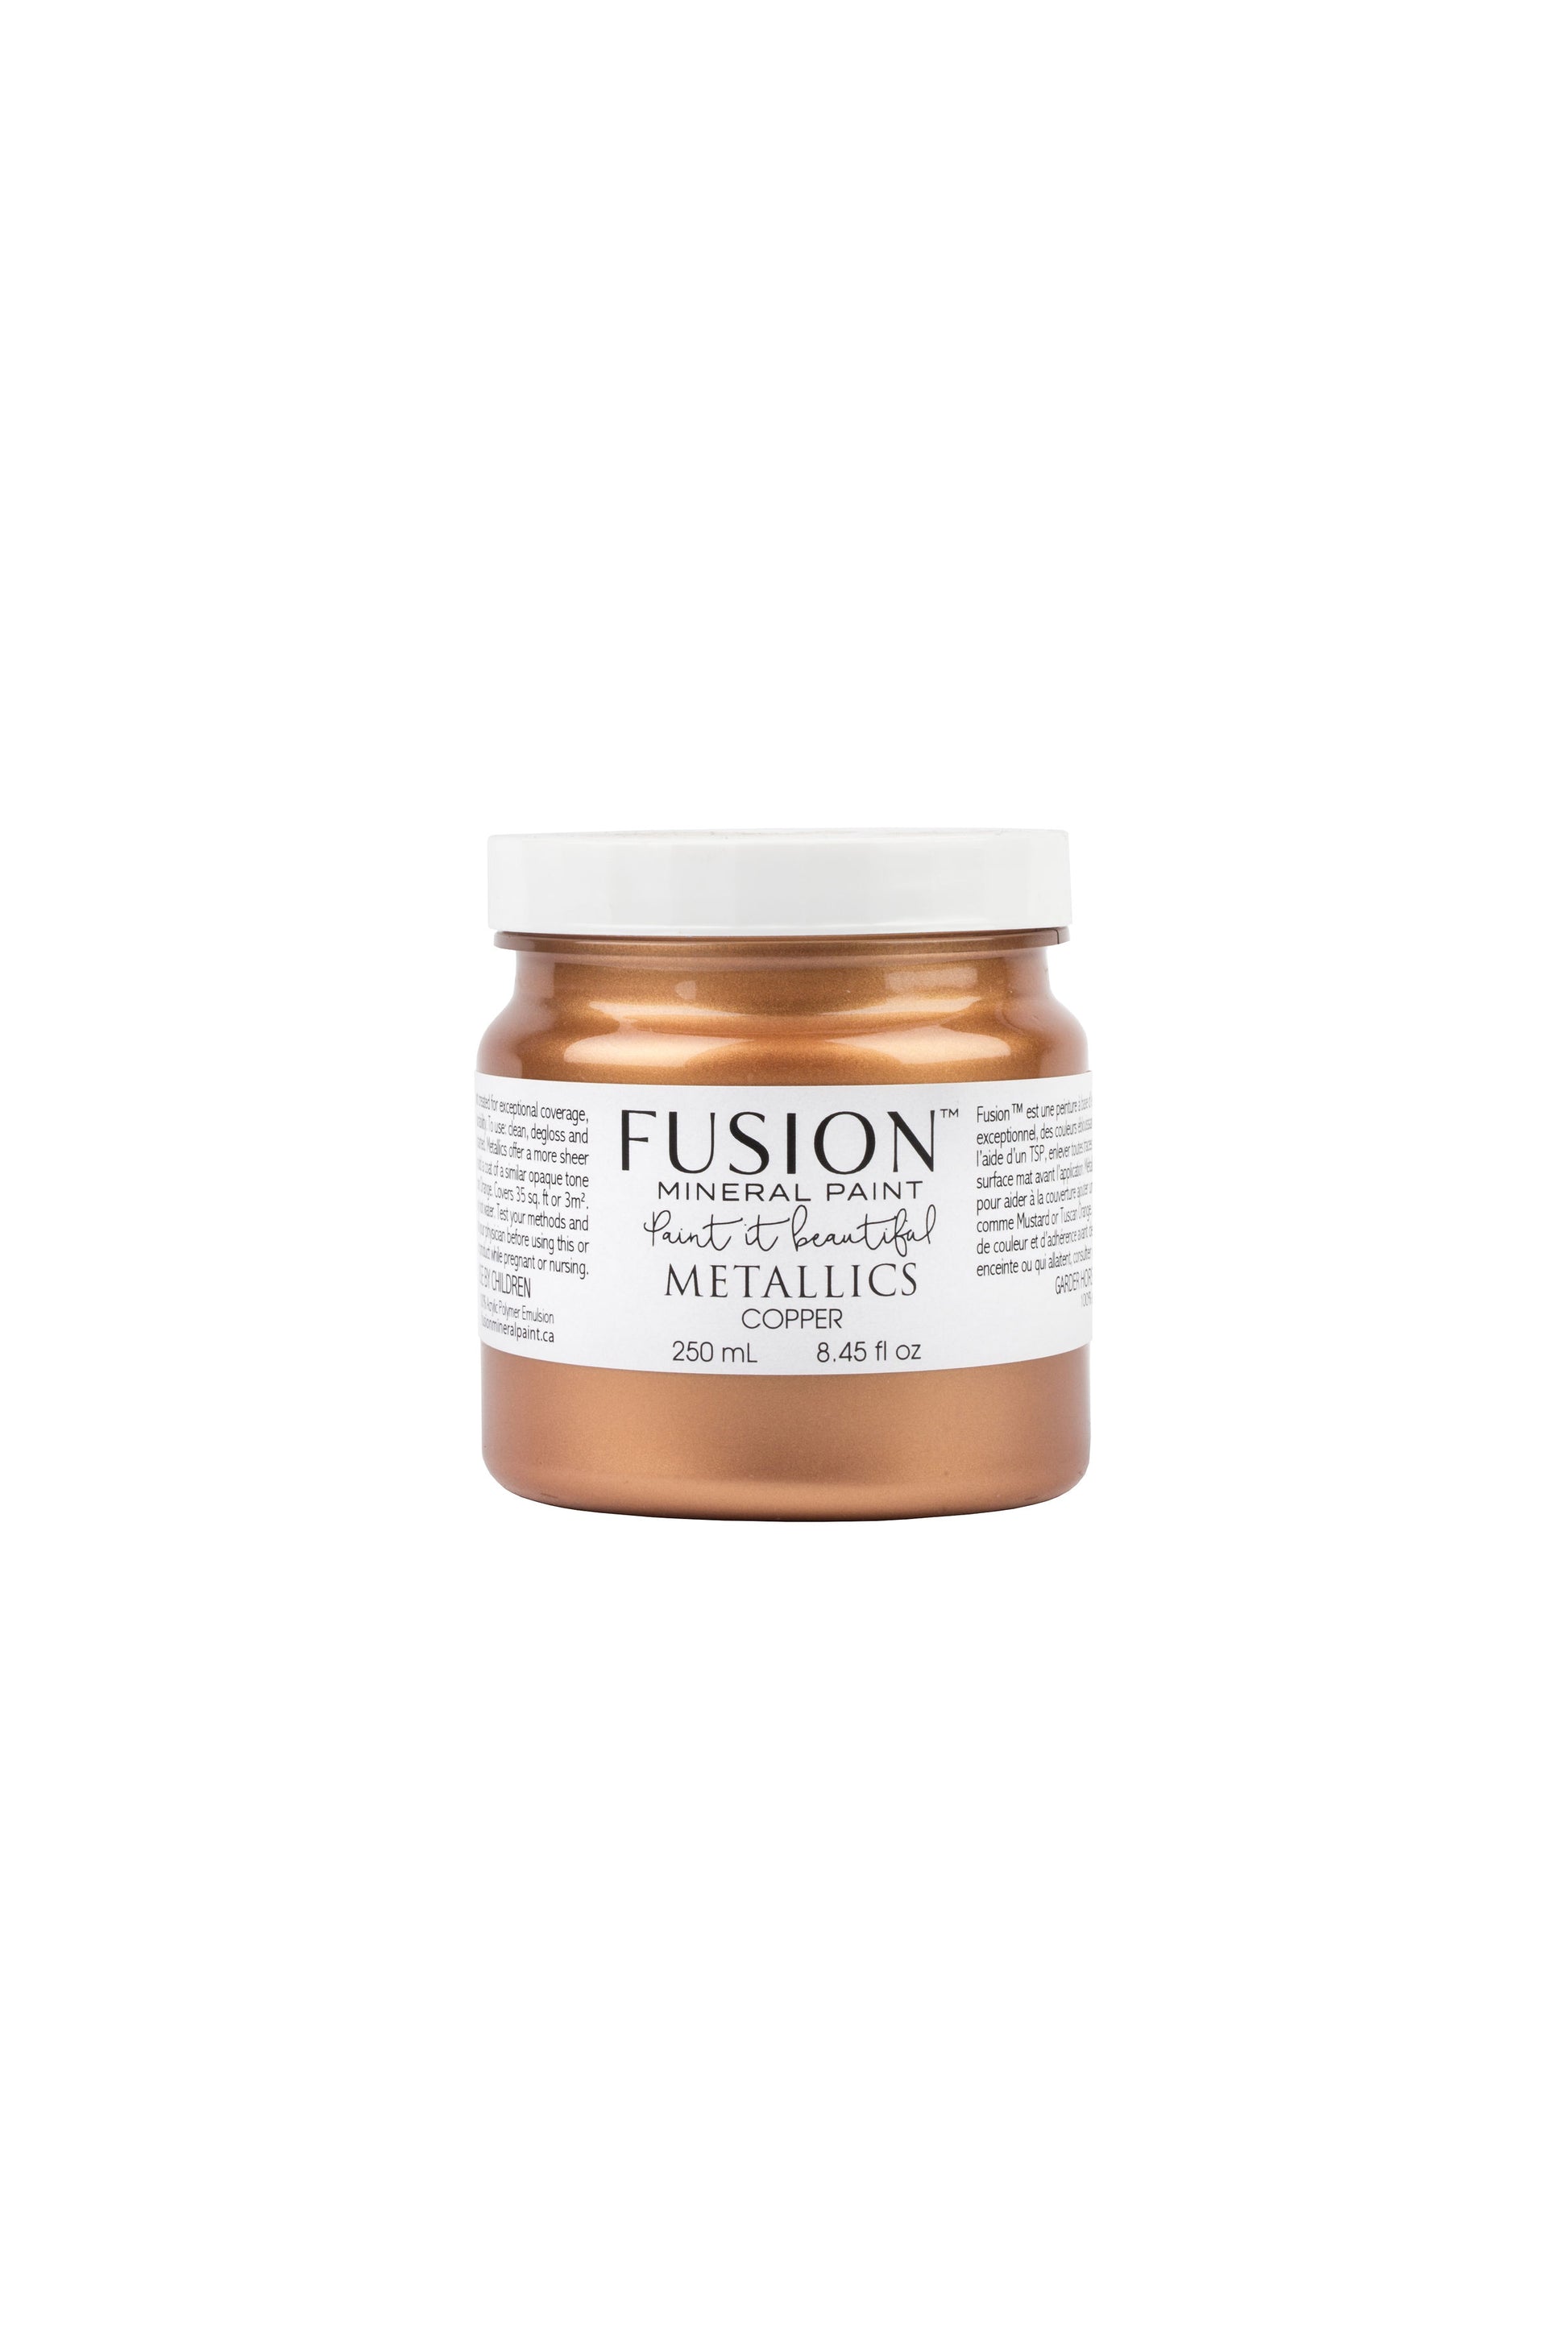 Fusion Metallics, Copper  -  250 ml, Old to New Furniture